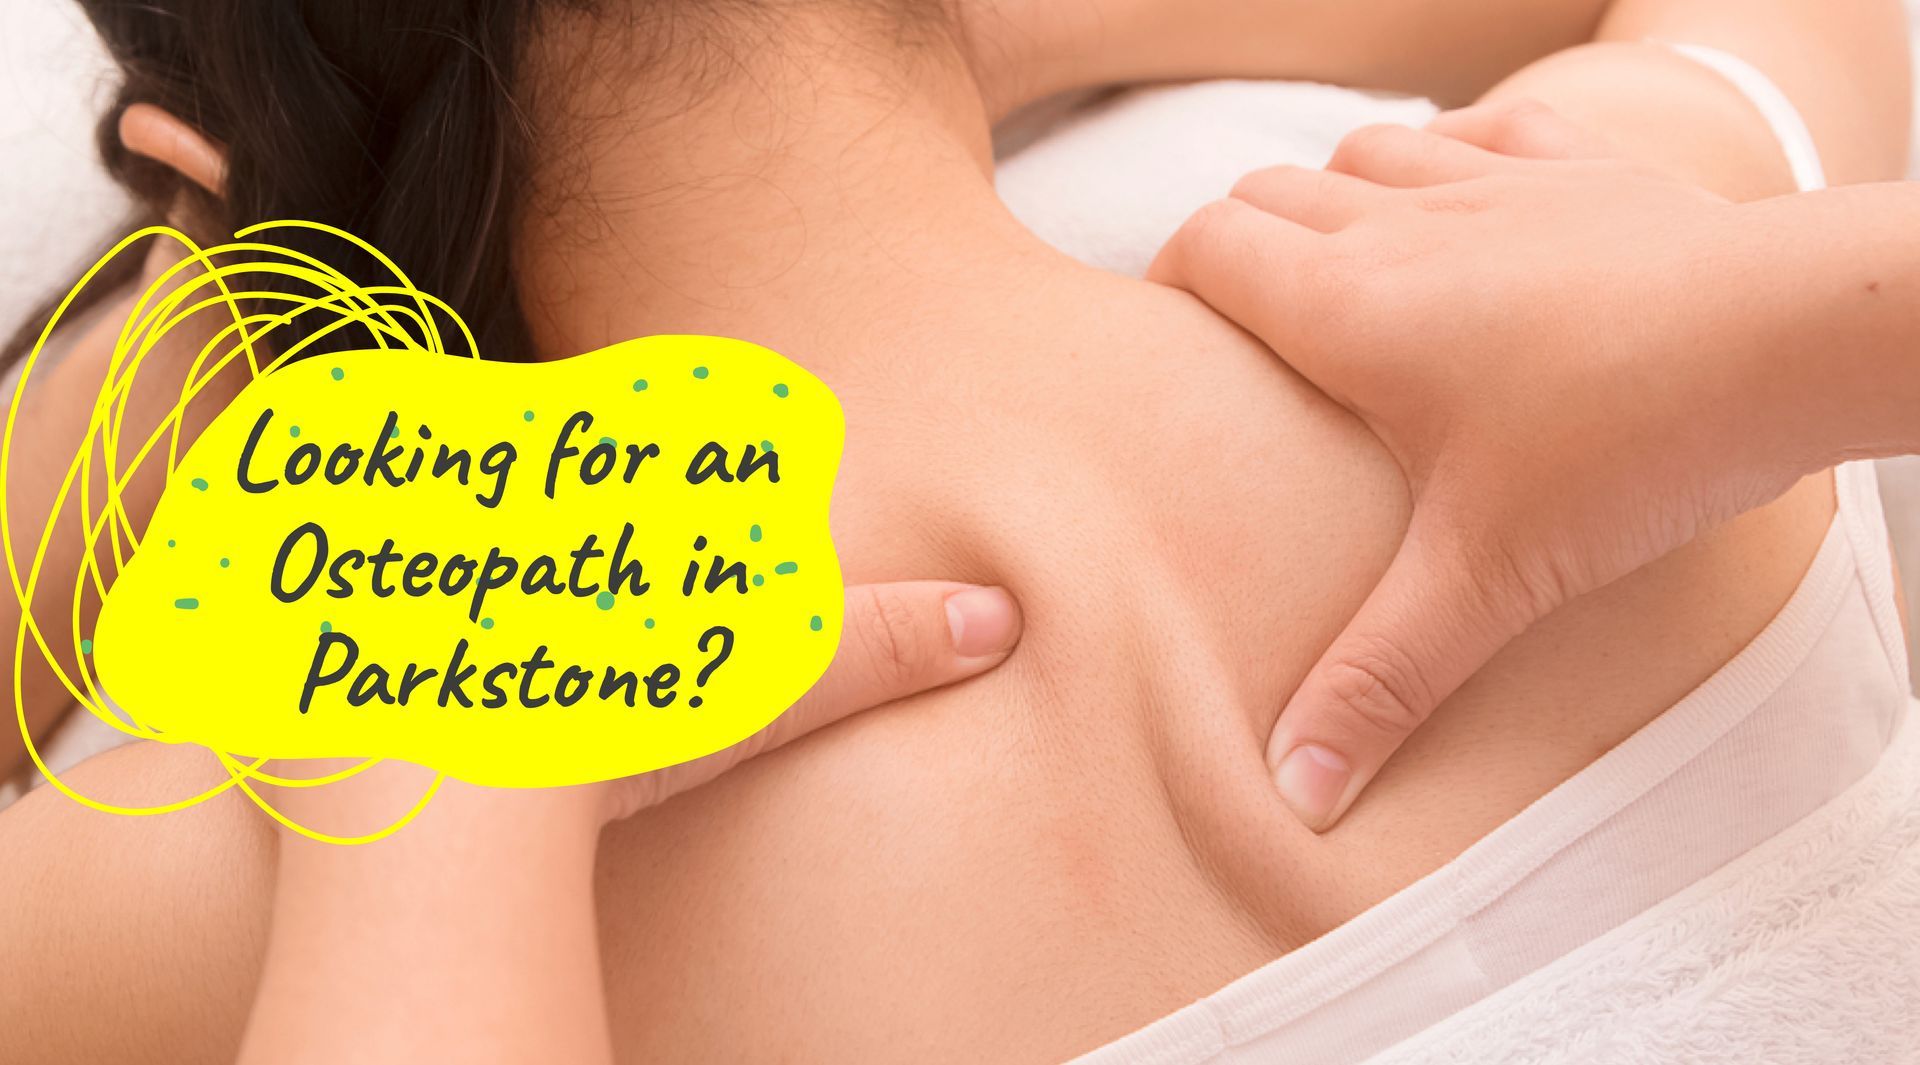 Parkstone Osteopaths is a highly regarded osteopathy clinic